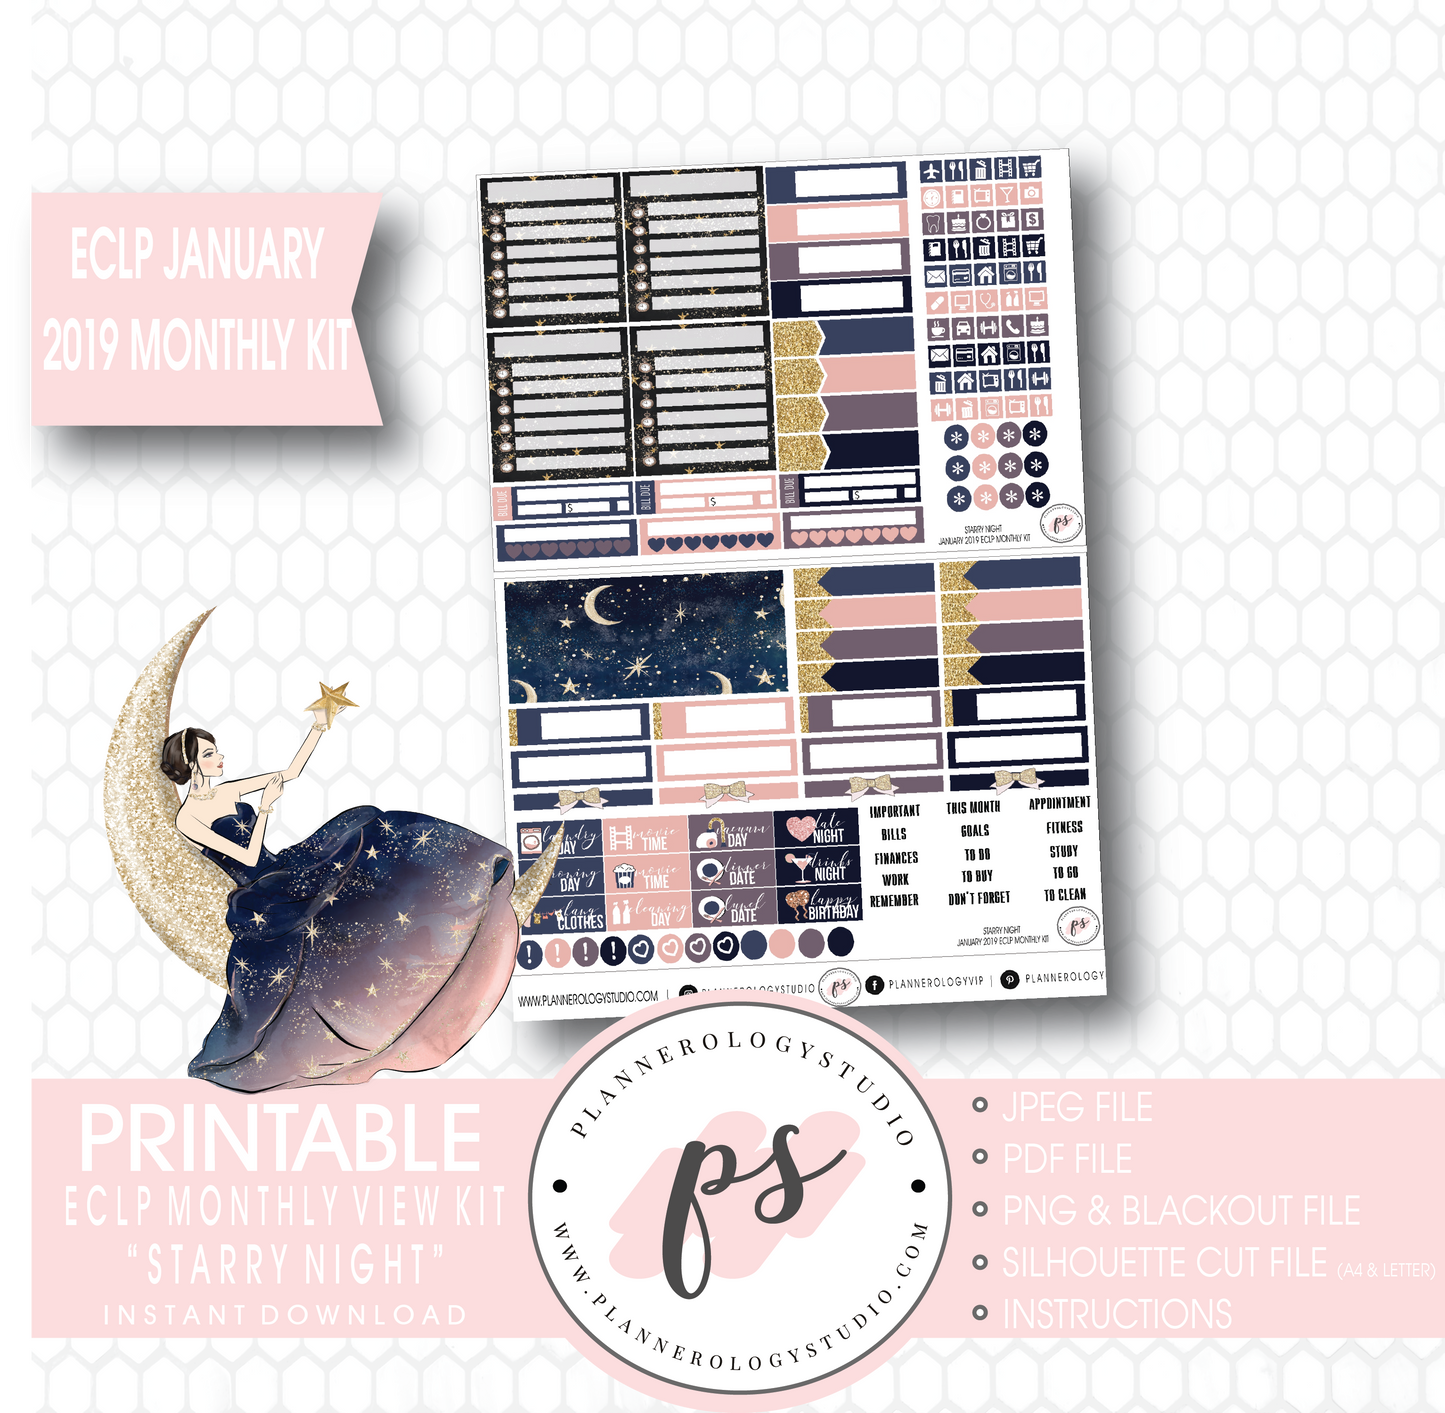 Starry Night New Years January 2019 Monthly View Kit Digital Printable Planner Stickers (for use with Erin Condren) - Plannerologystudio